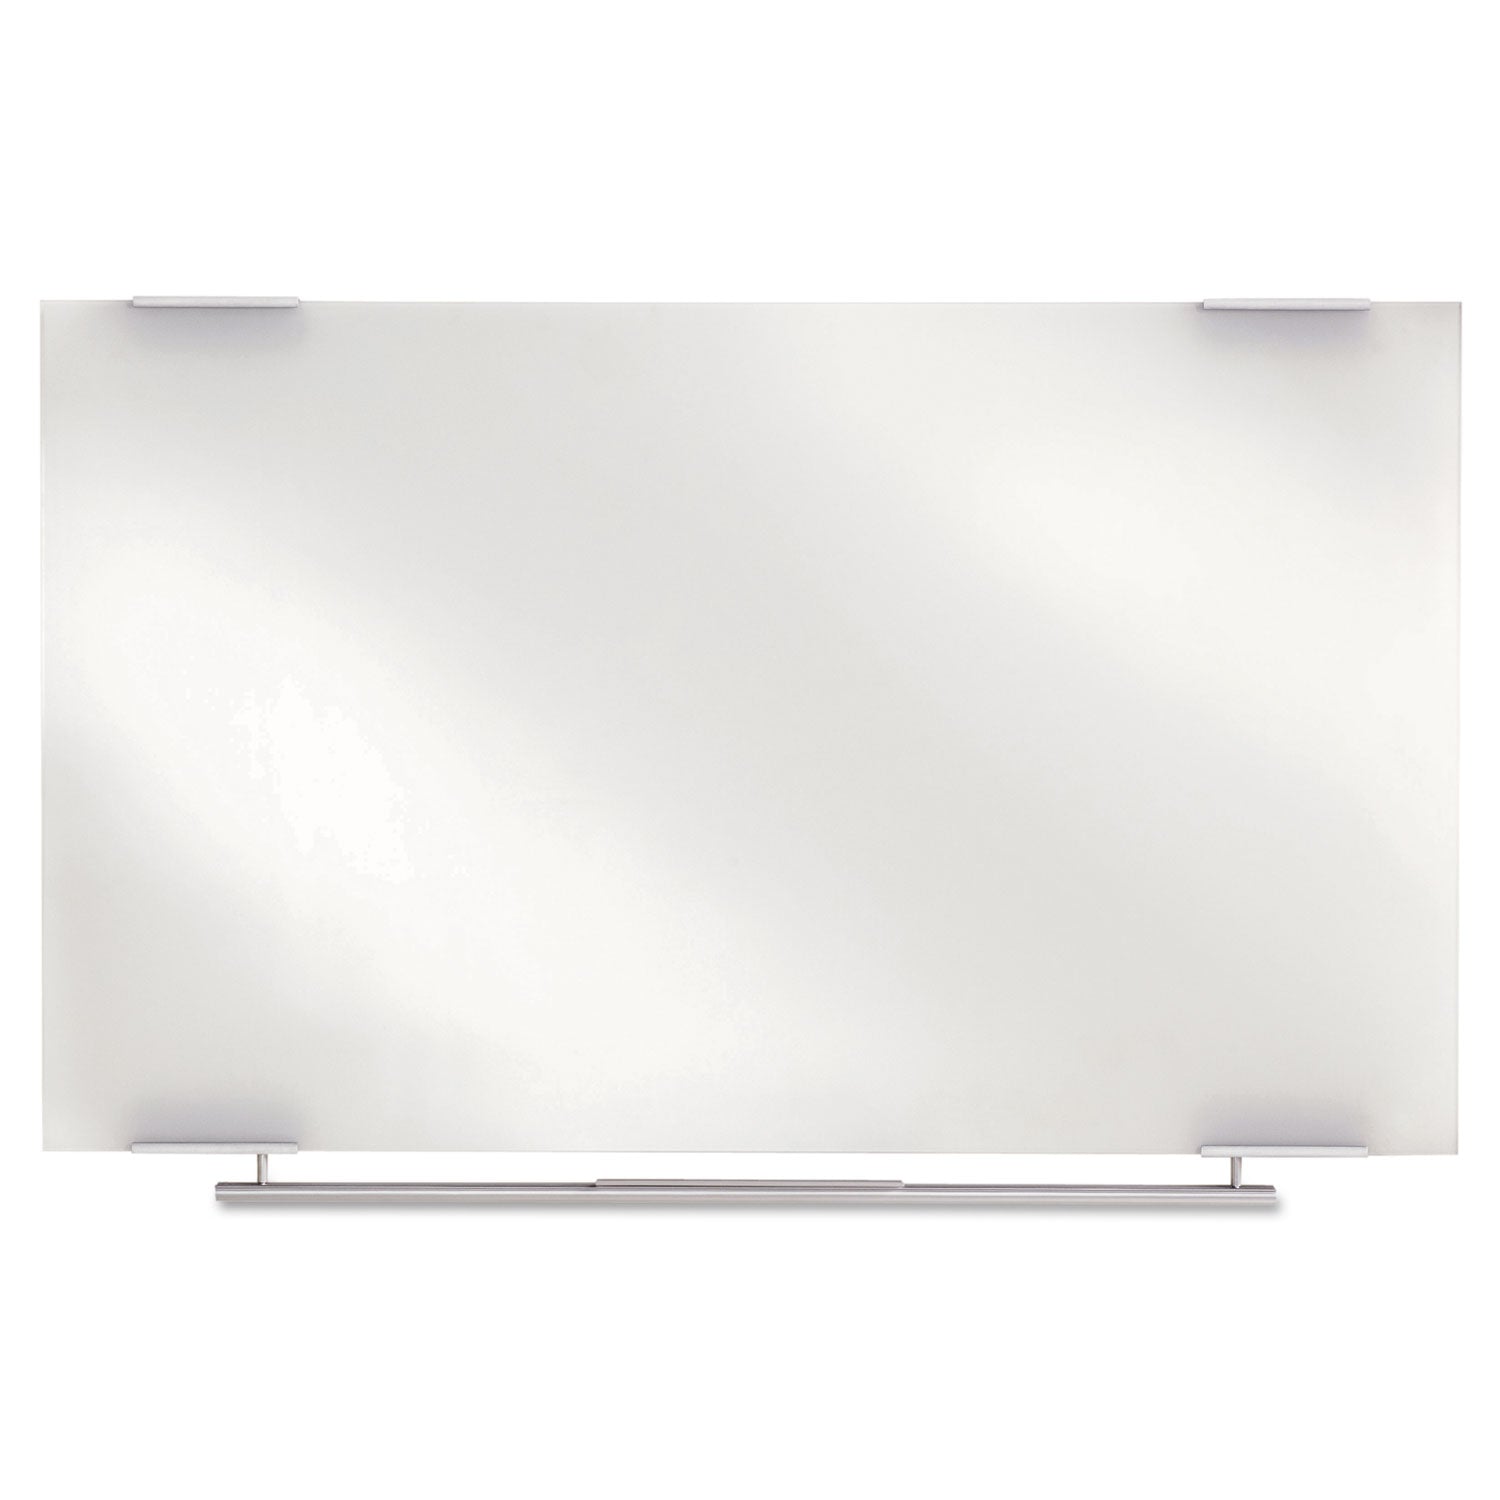 Clarity Glass Dry Erase Board with Aluminum Trim, 48 x 36, White Surface - 